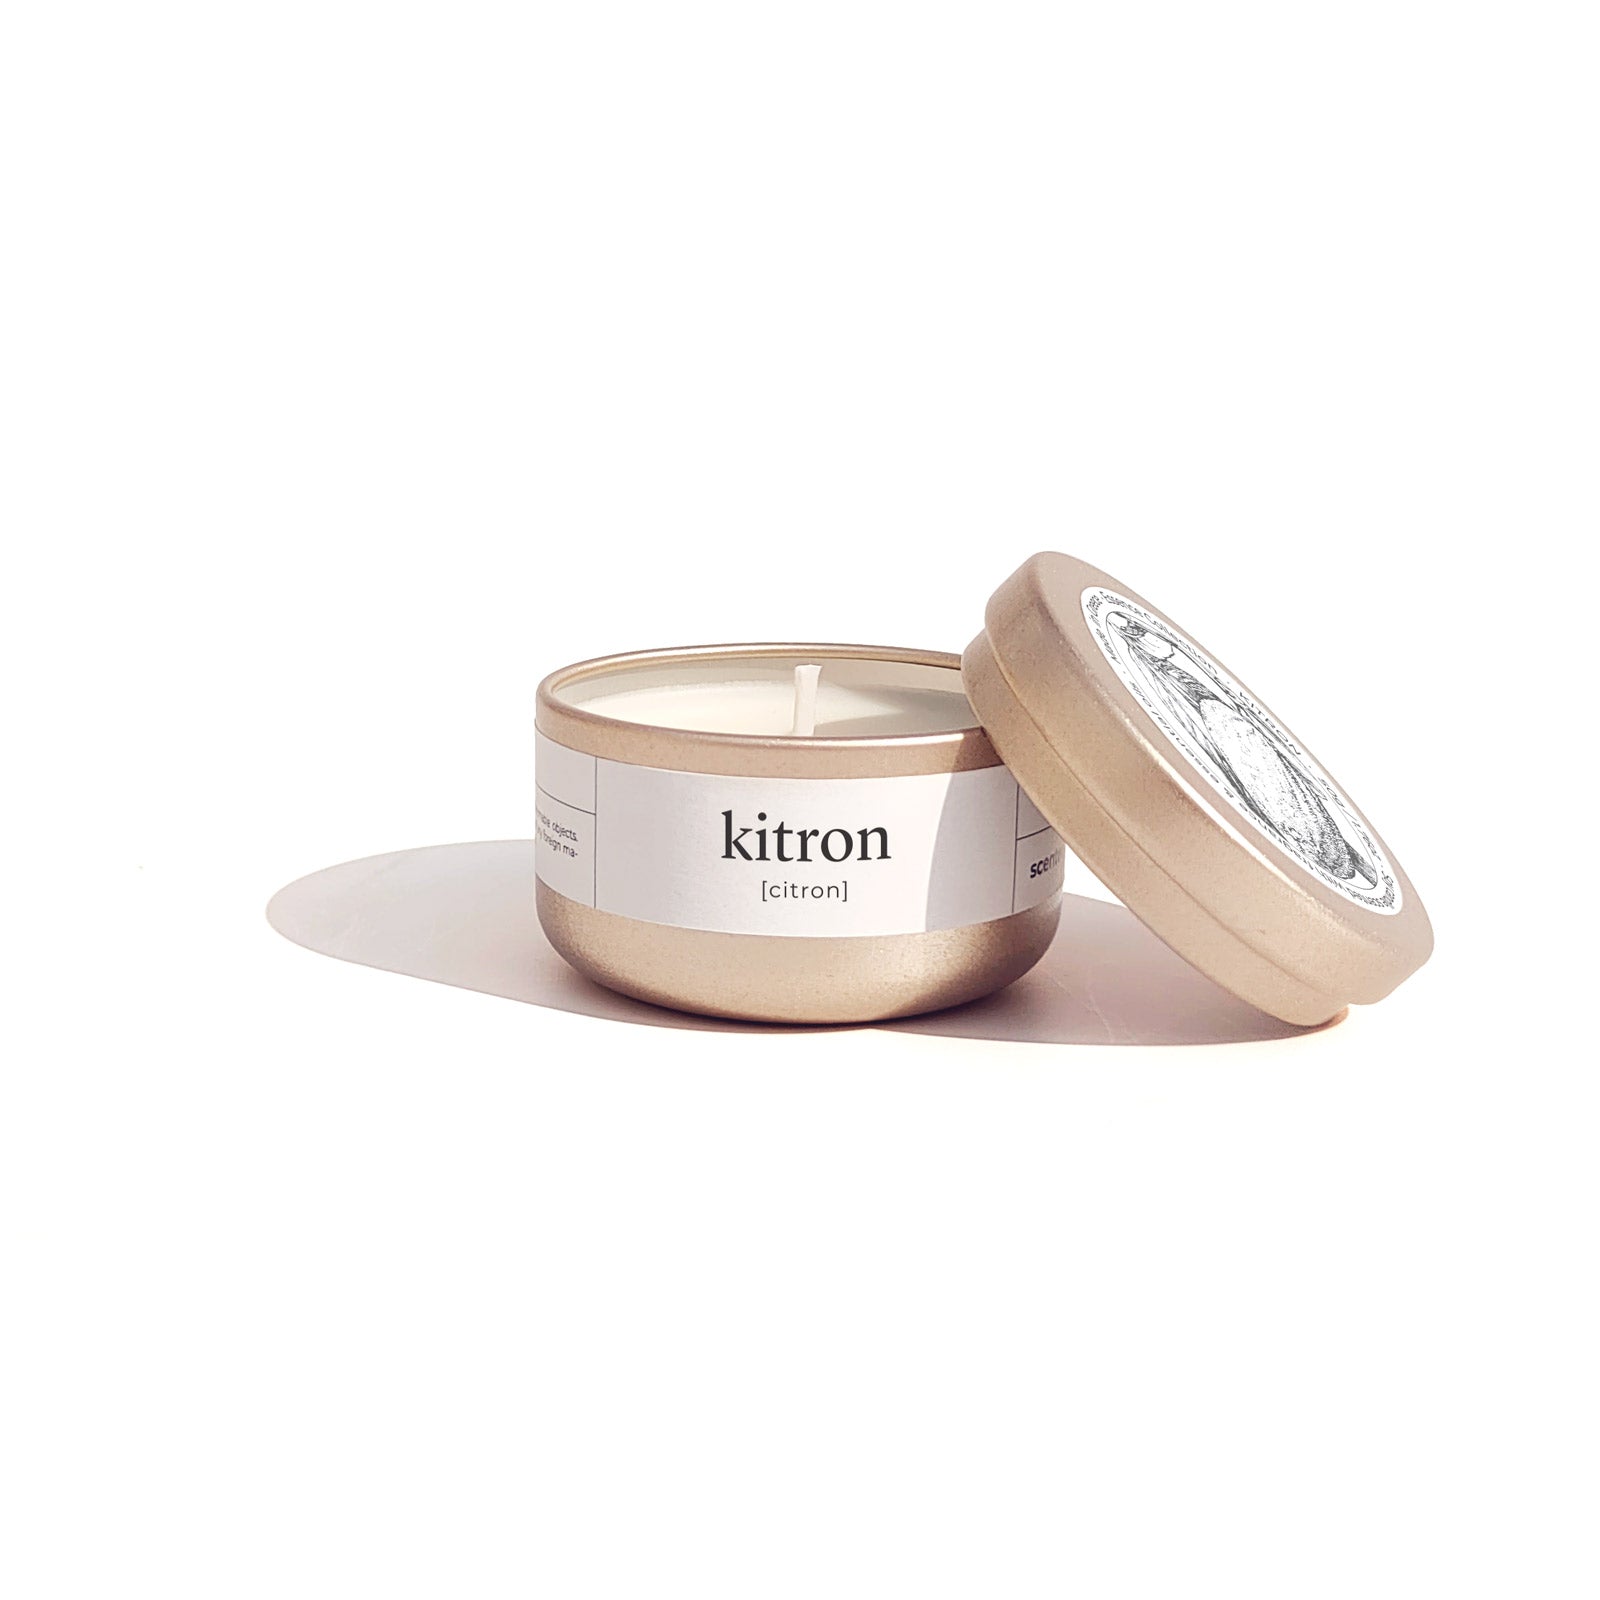 Compact and elegant candle packing, ideal companion for your travels or for the office